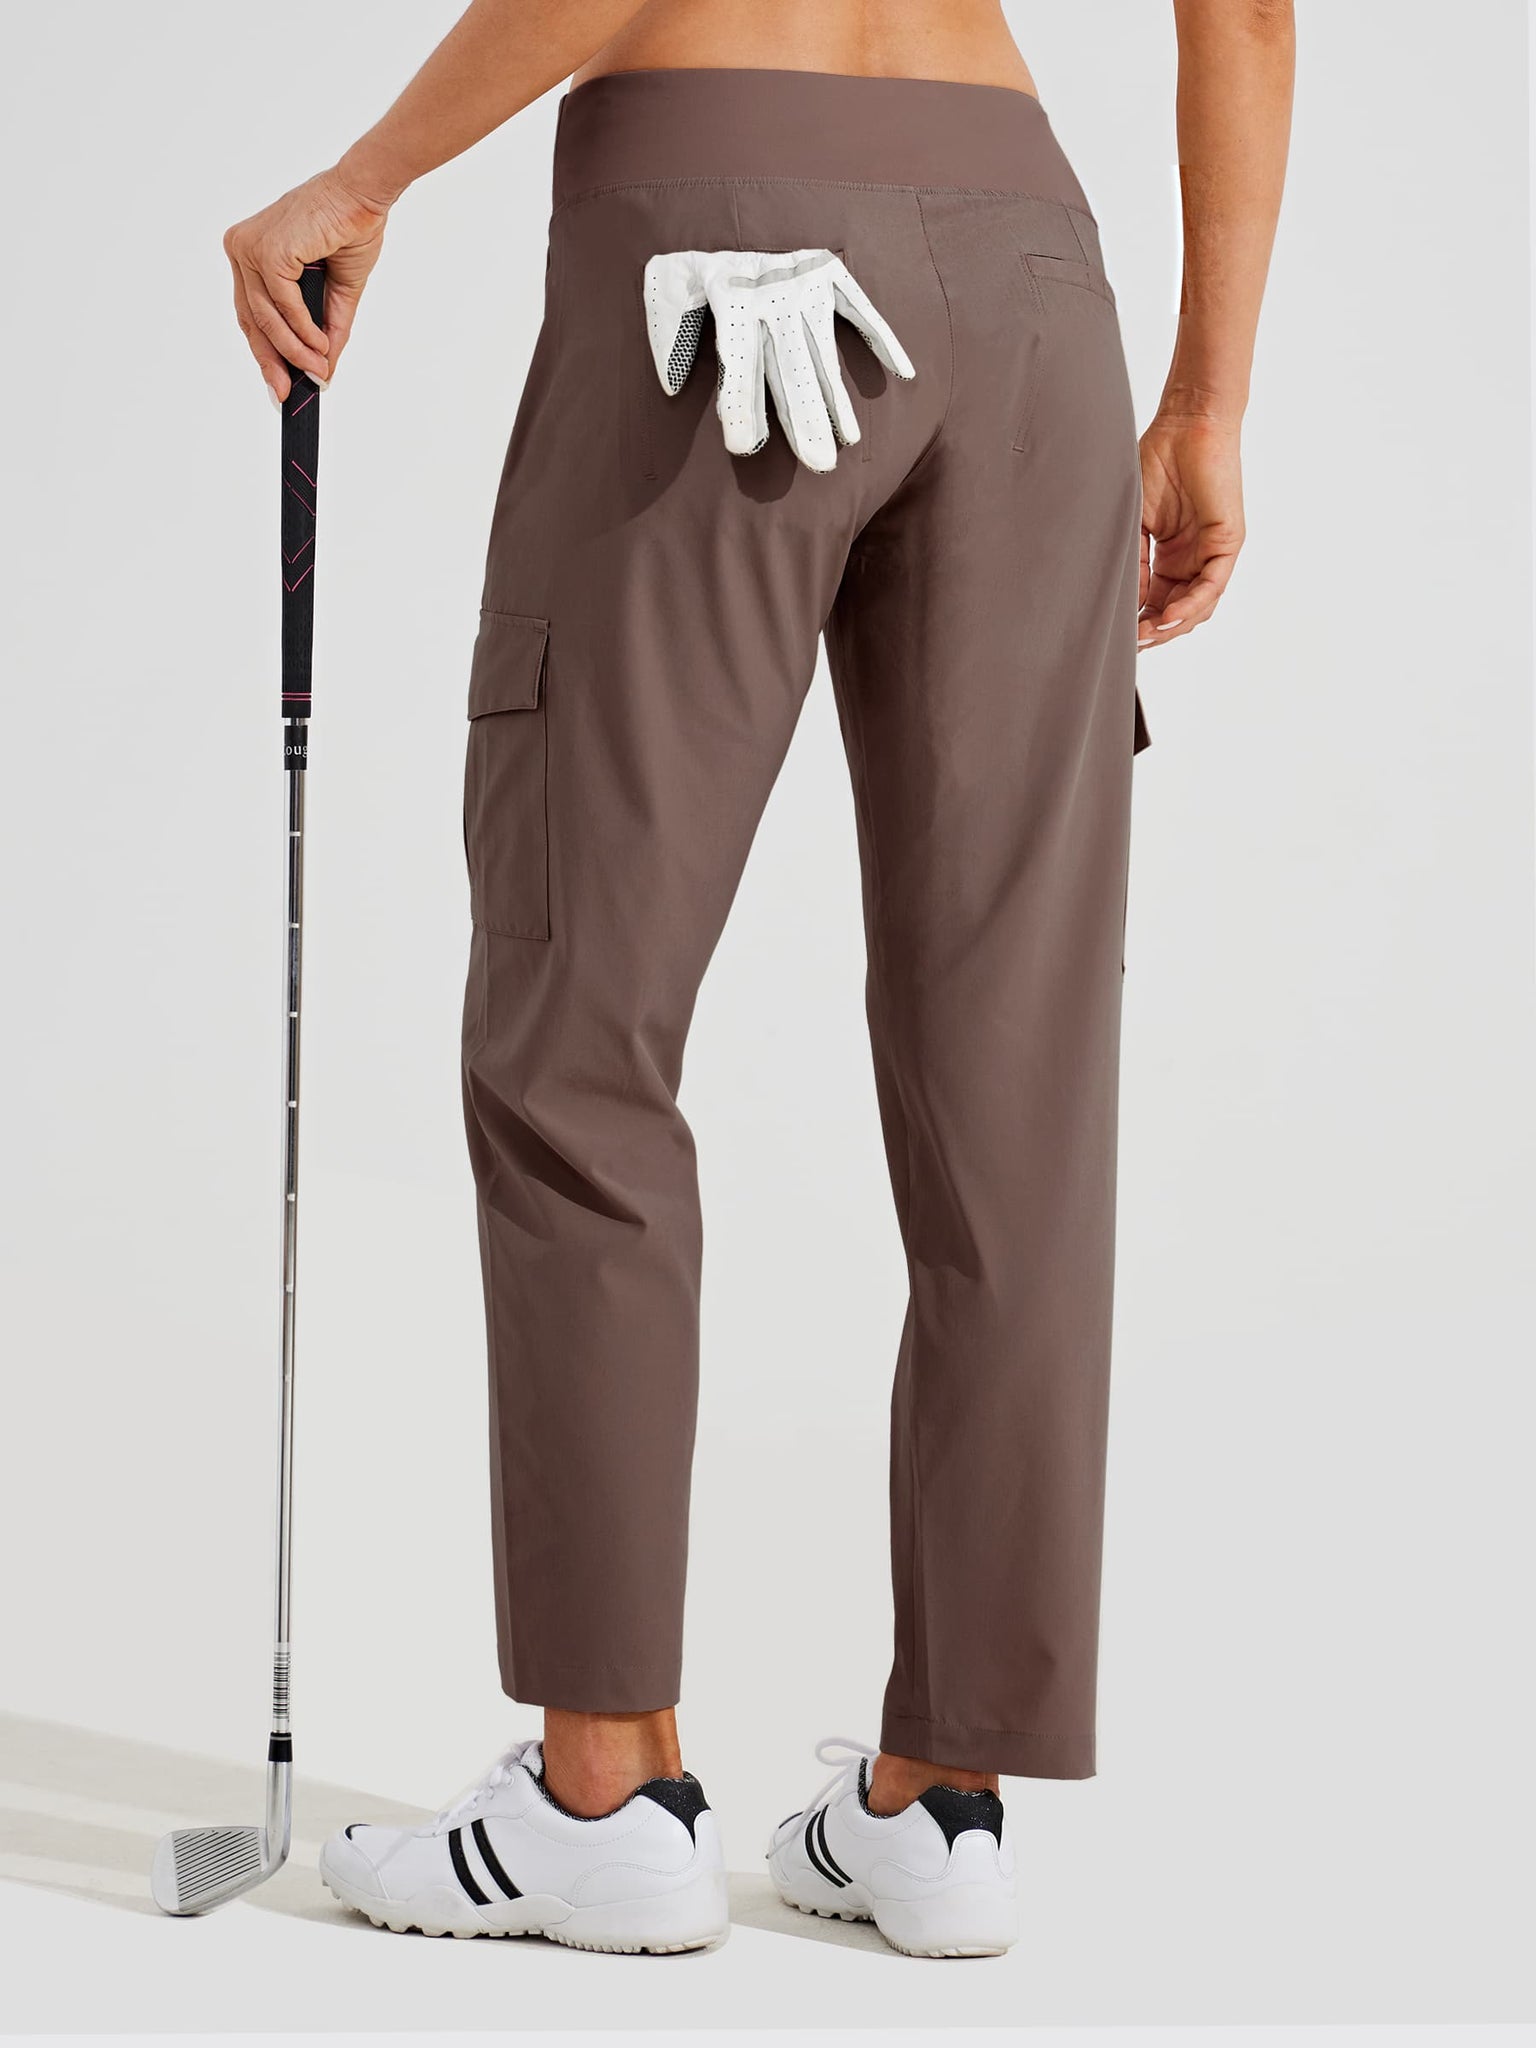 WILLIT Women's Golf Hiking Capris Pants with Pockets Quick Dry